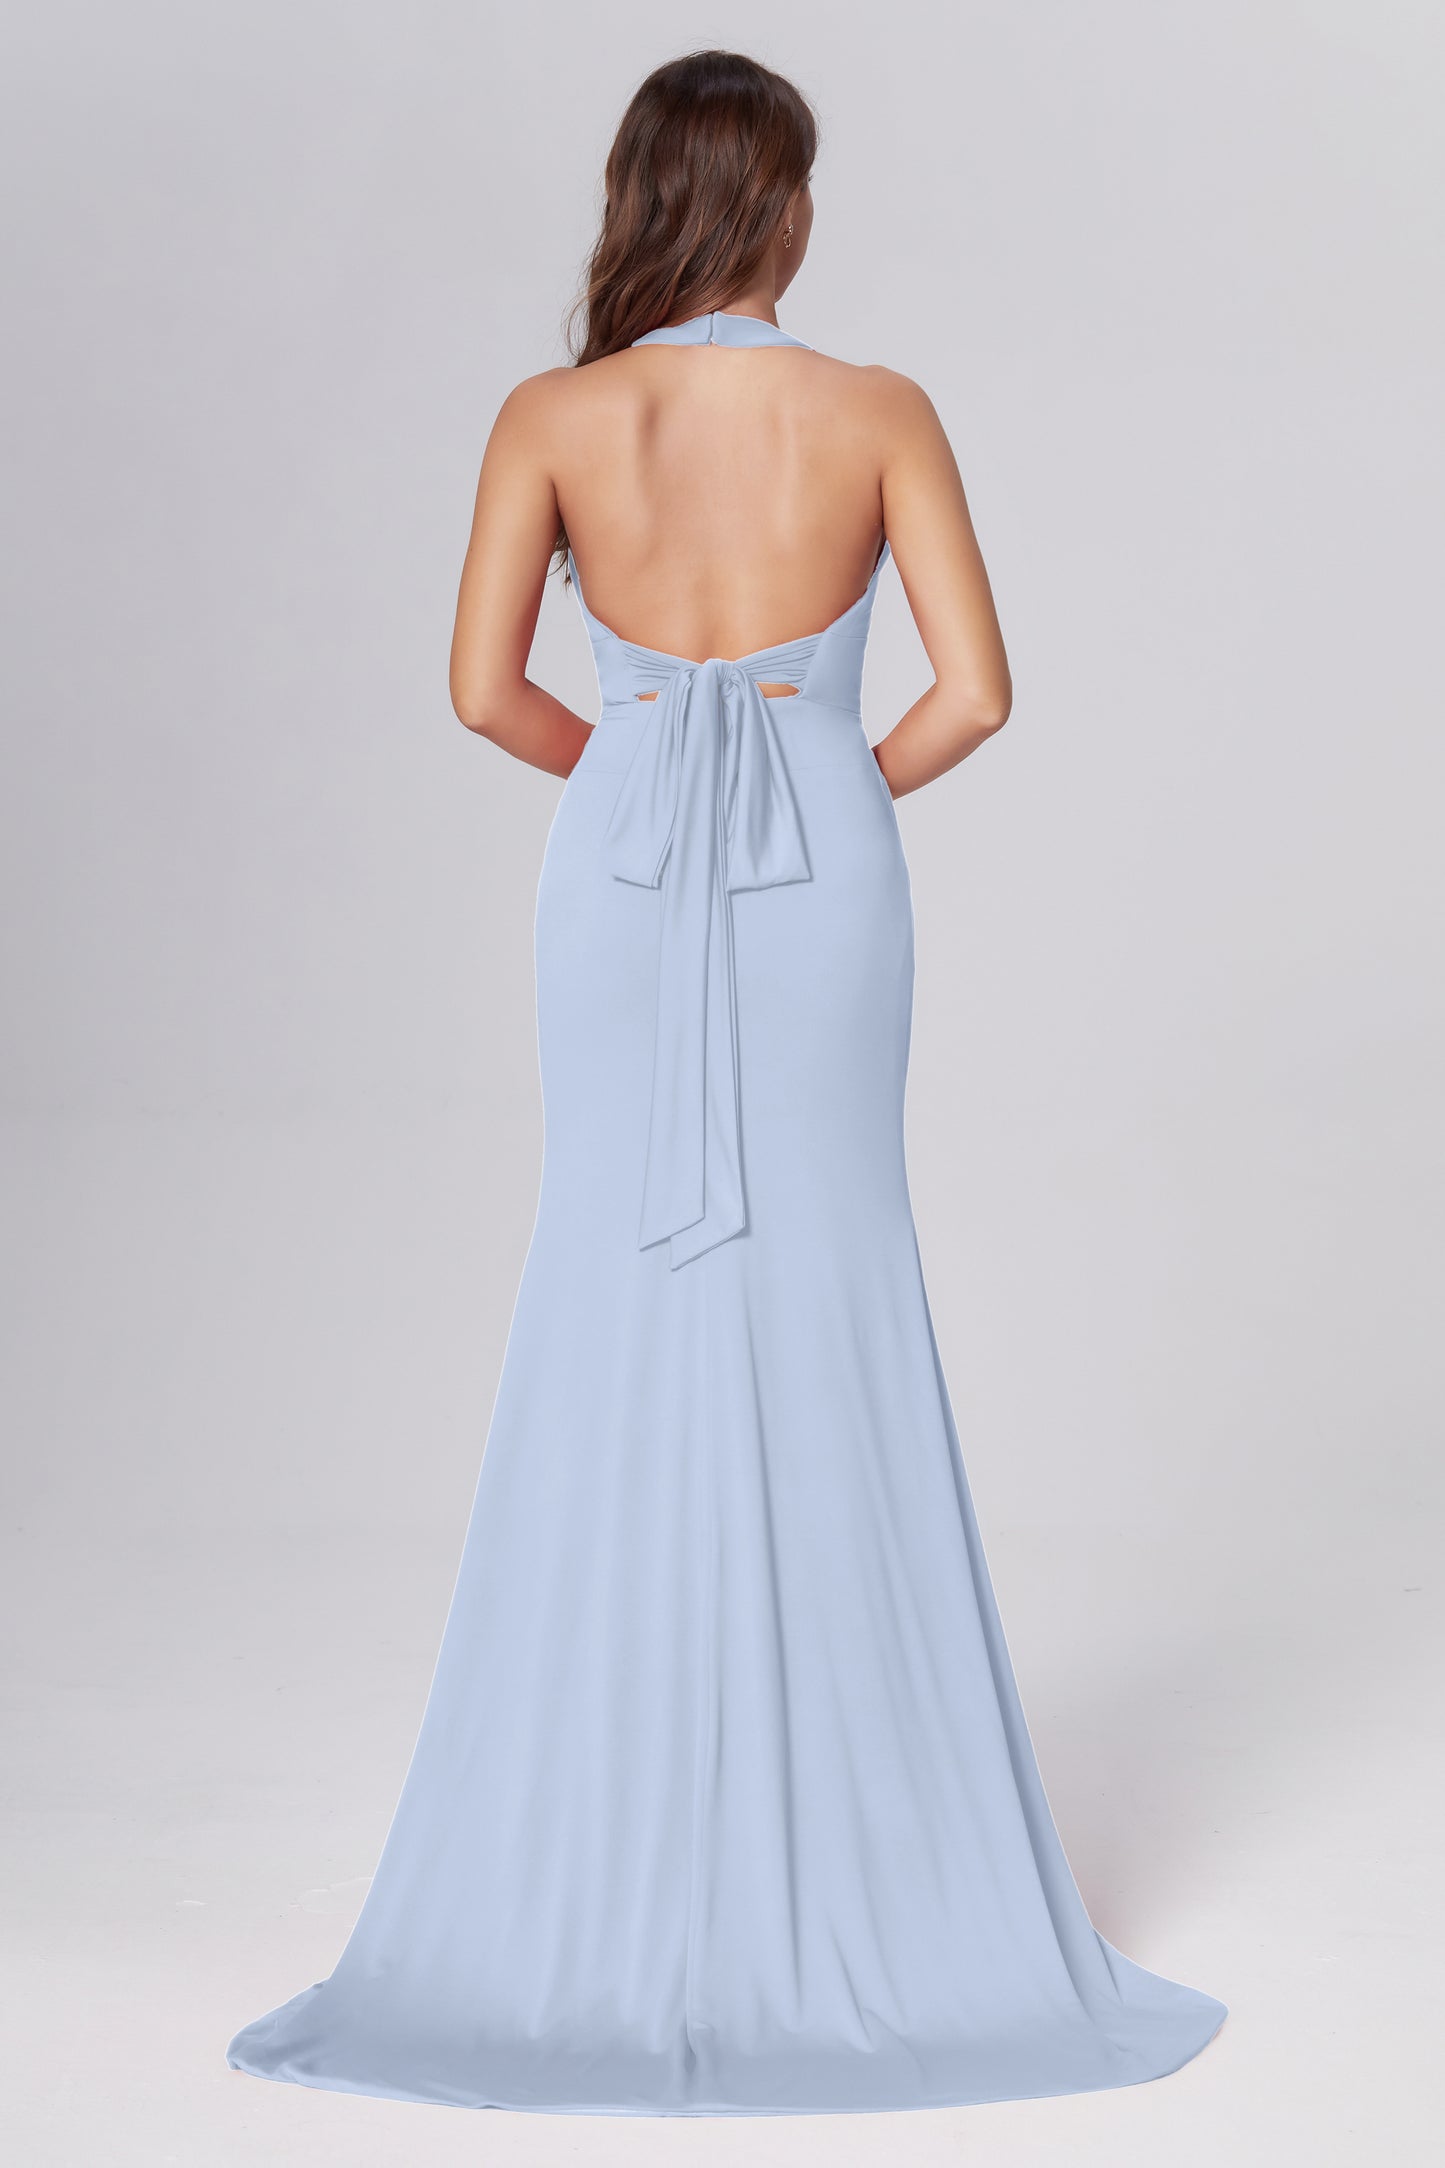 Mermaid Backless Prom Dresses with Trailing